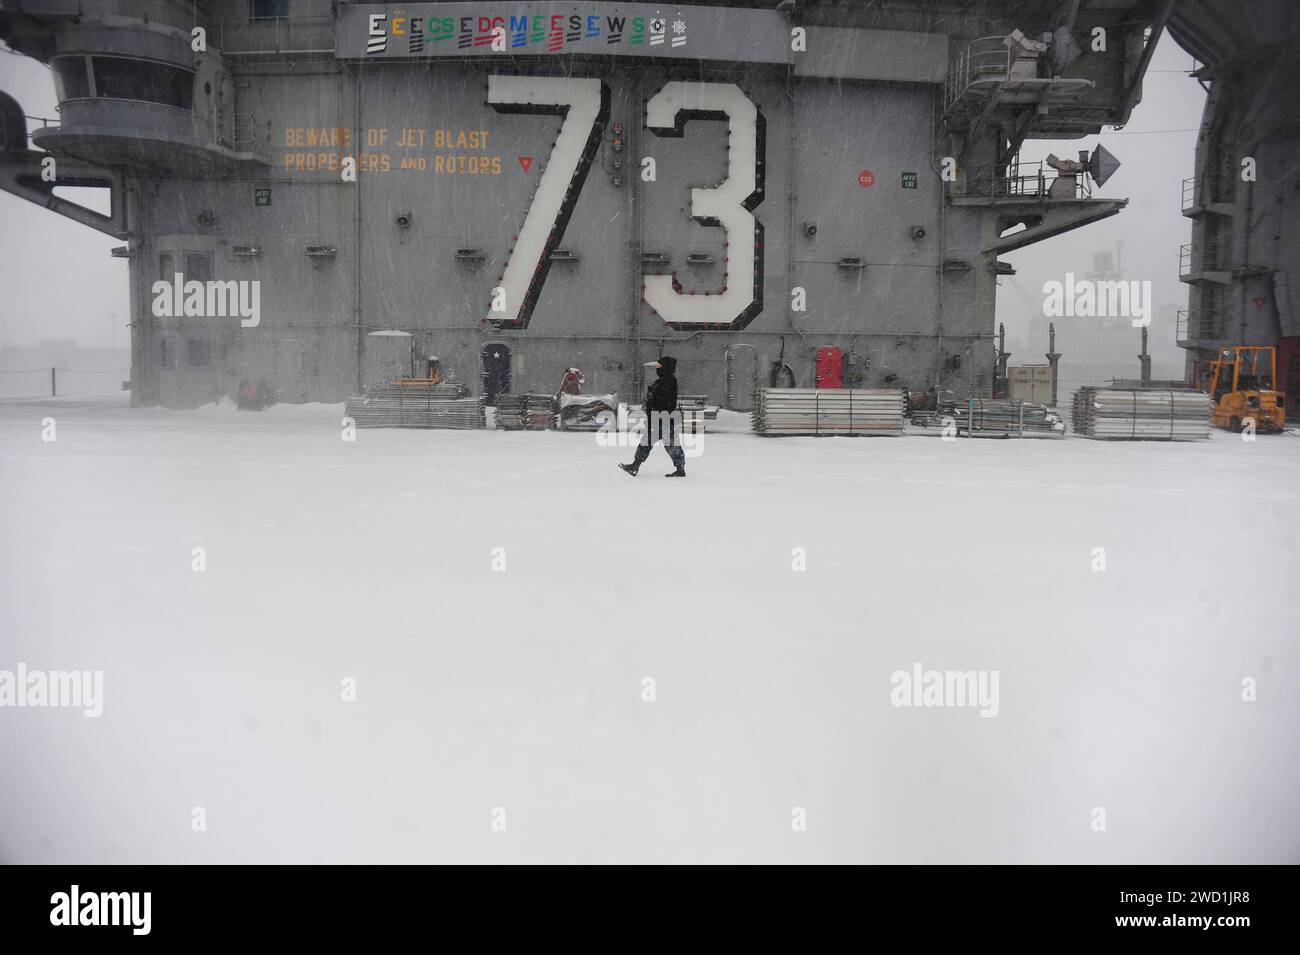 Airman conducts a security rove aboard USS George Washington's flight deck during a winter storm. Stock Photo